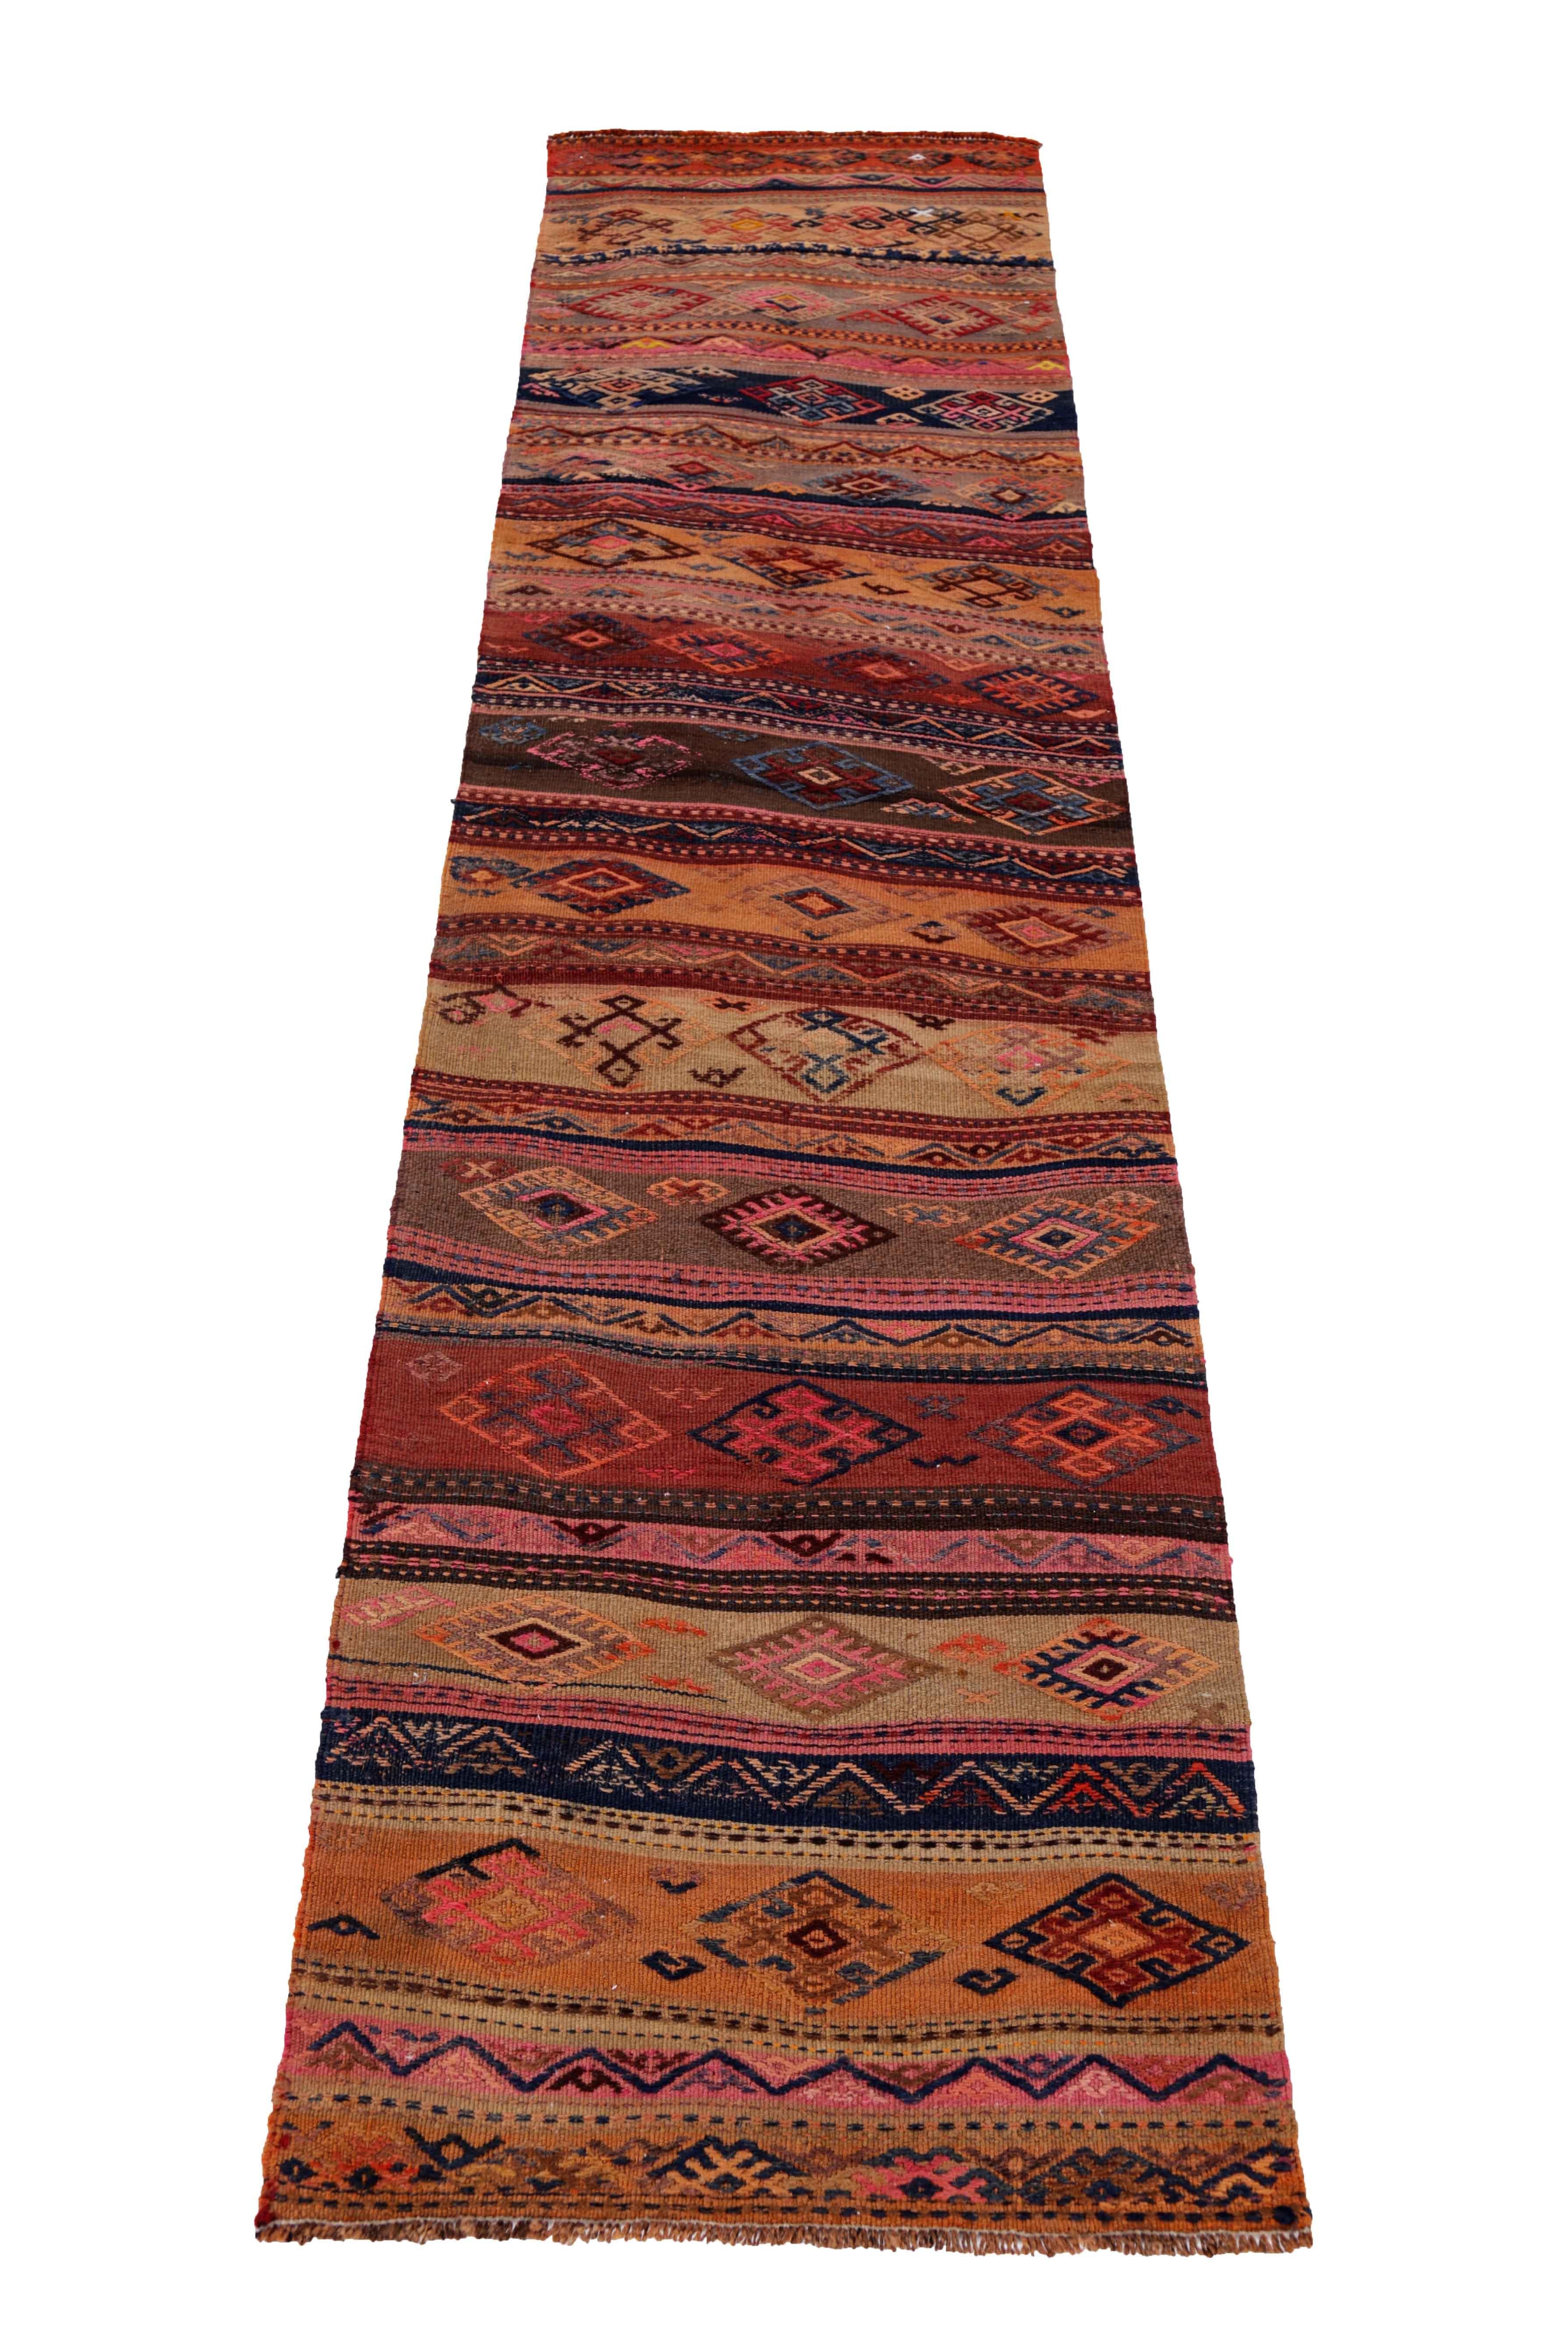 Antique Persian runner rug handwoven from the finest sheep’s wool. It’s colored with all-natural vegetable dyes that are safe for humans and pets. It’s a traditional Kilim design handwoven by expert artisans. It’s a lovely runner rug that can be